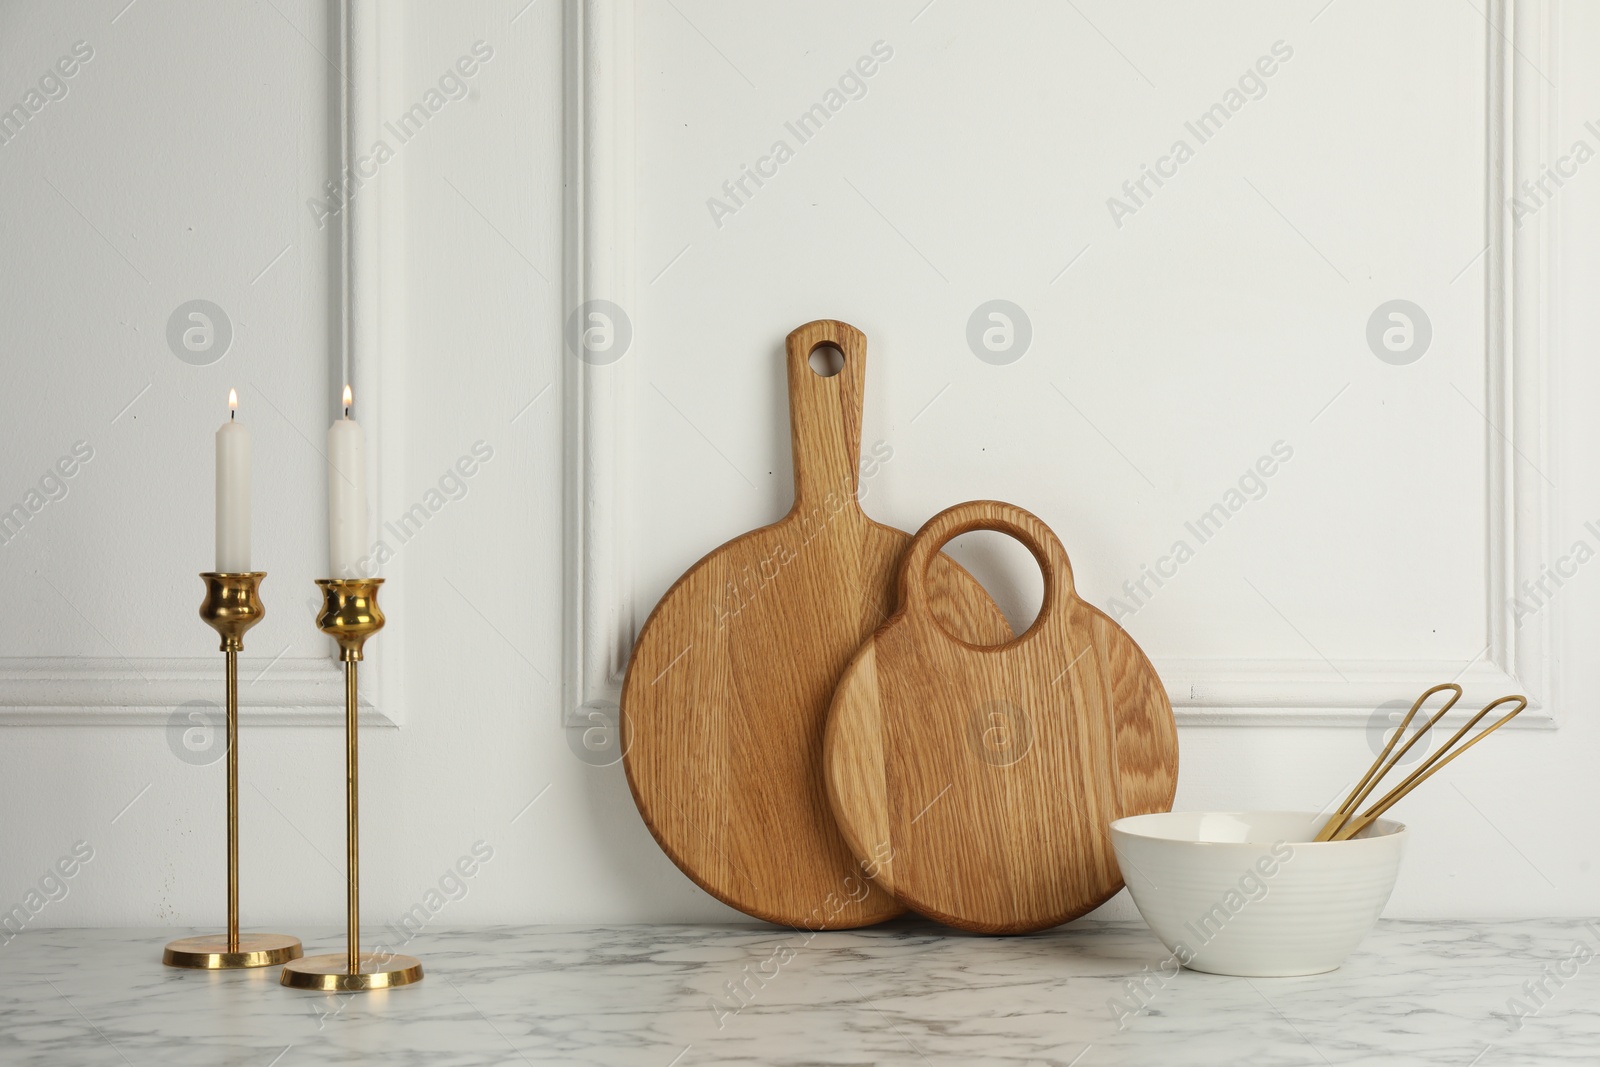 Photo of Wooden cutting boards, bowl and candlesticks on white marble table